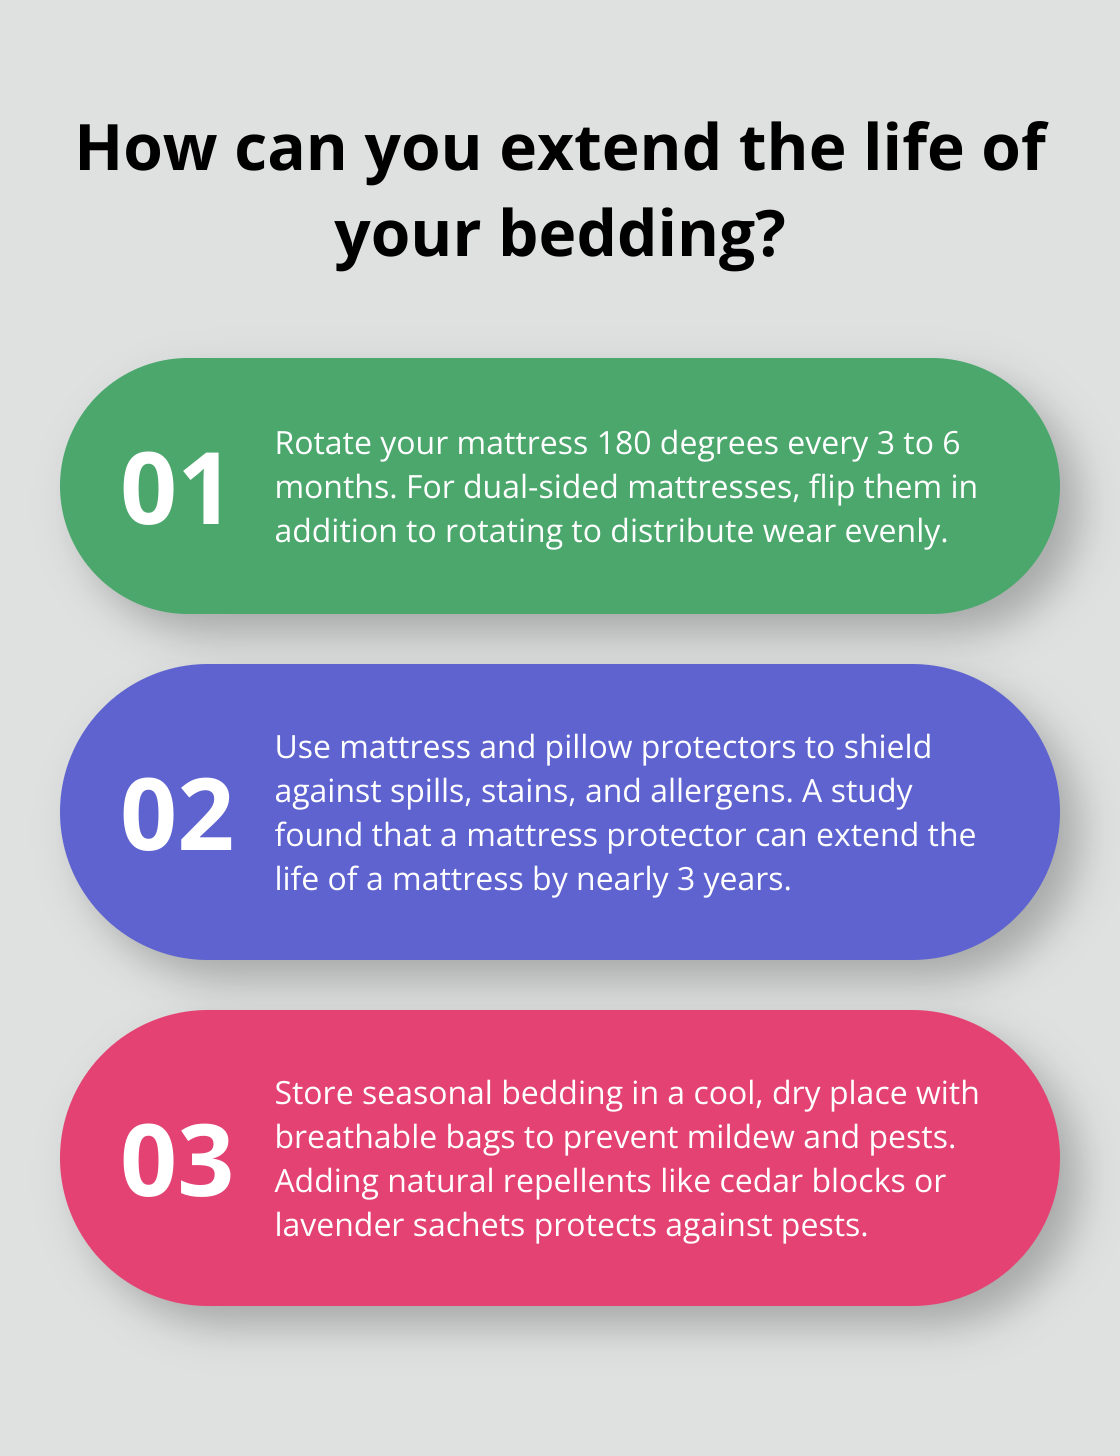 Fact - How can you extend the life of your bedding?